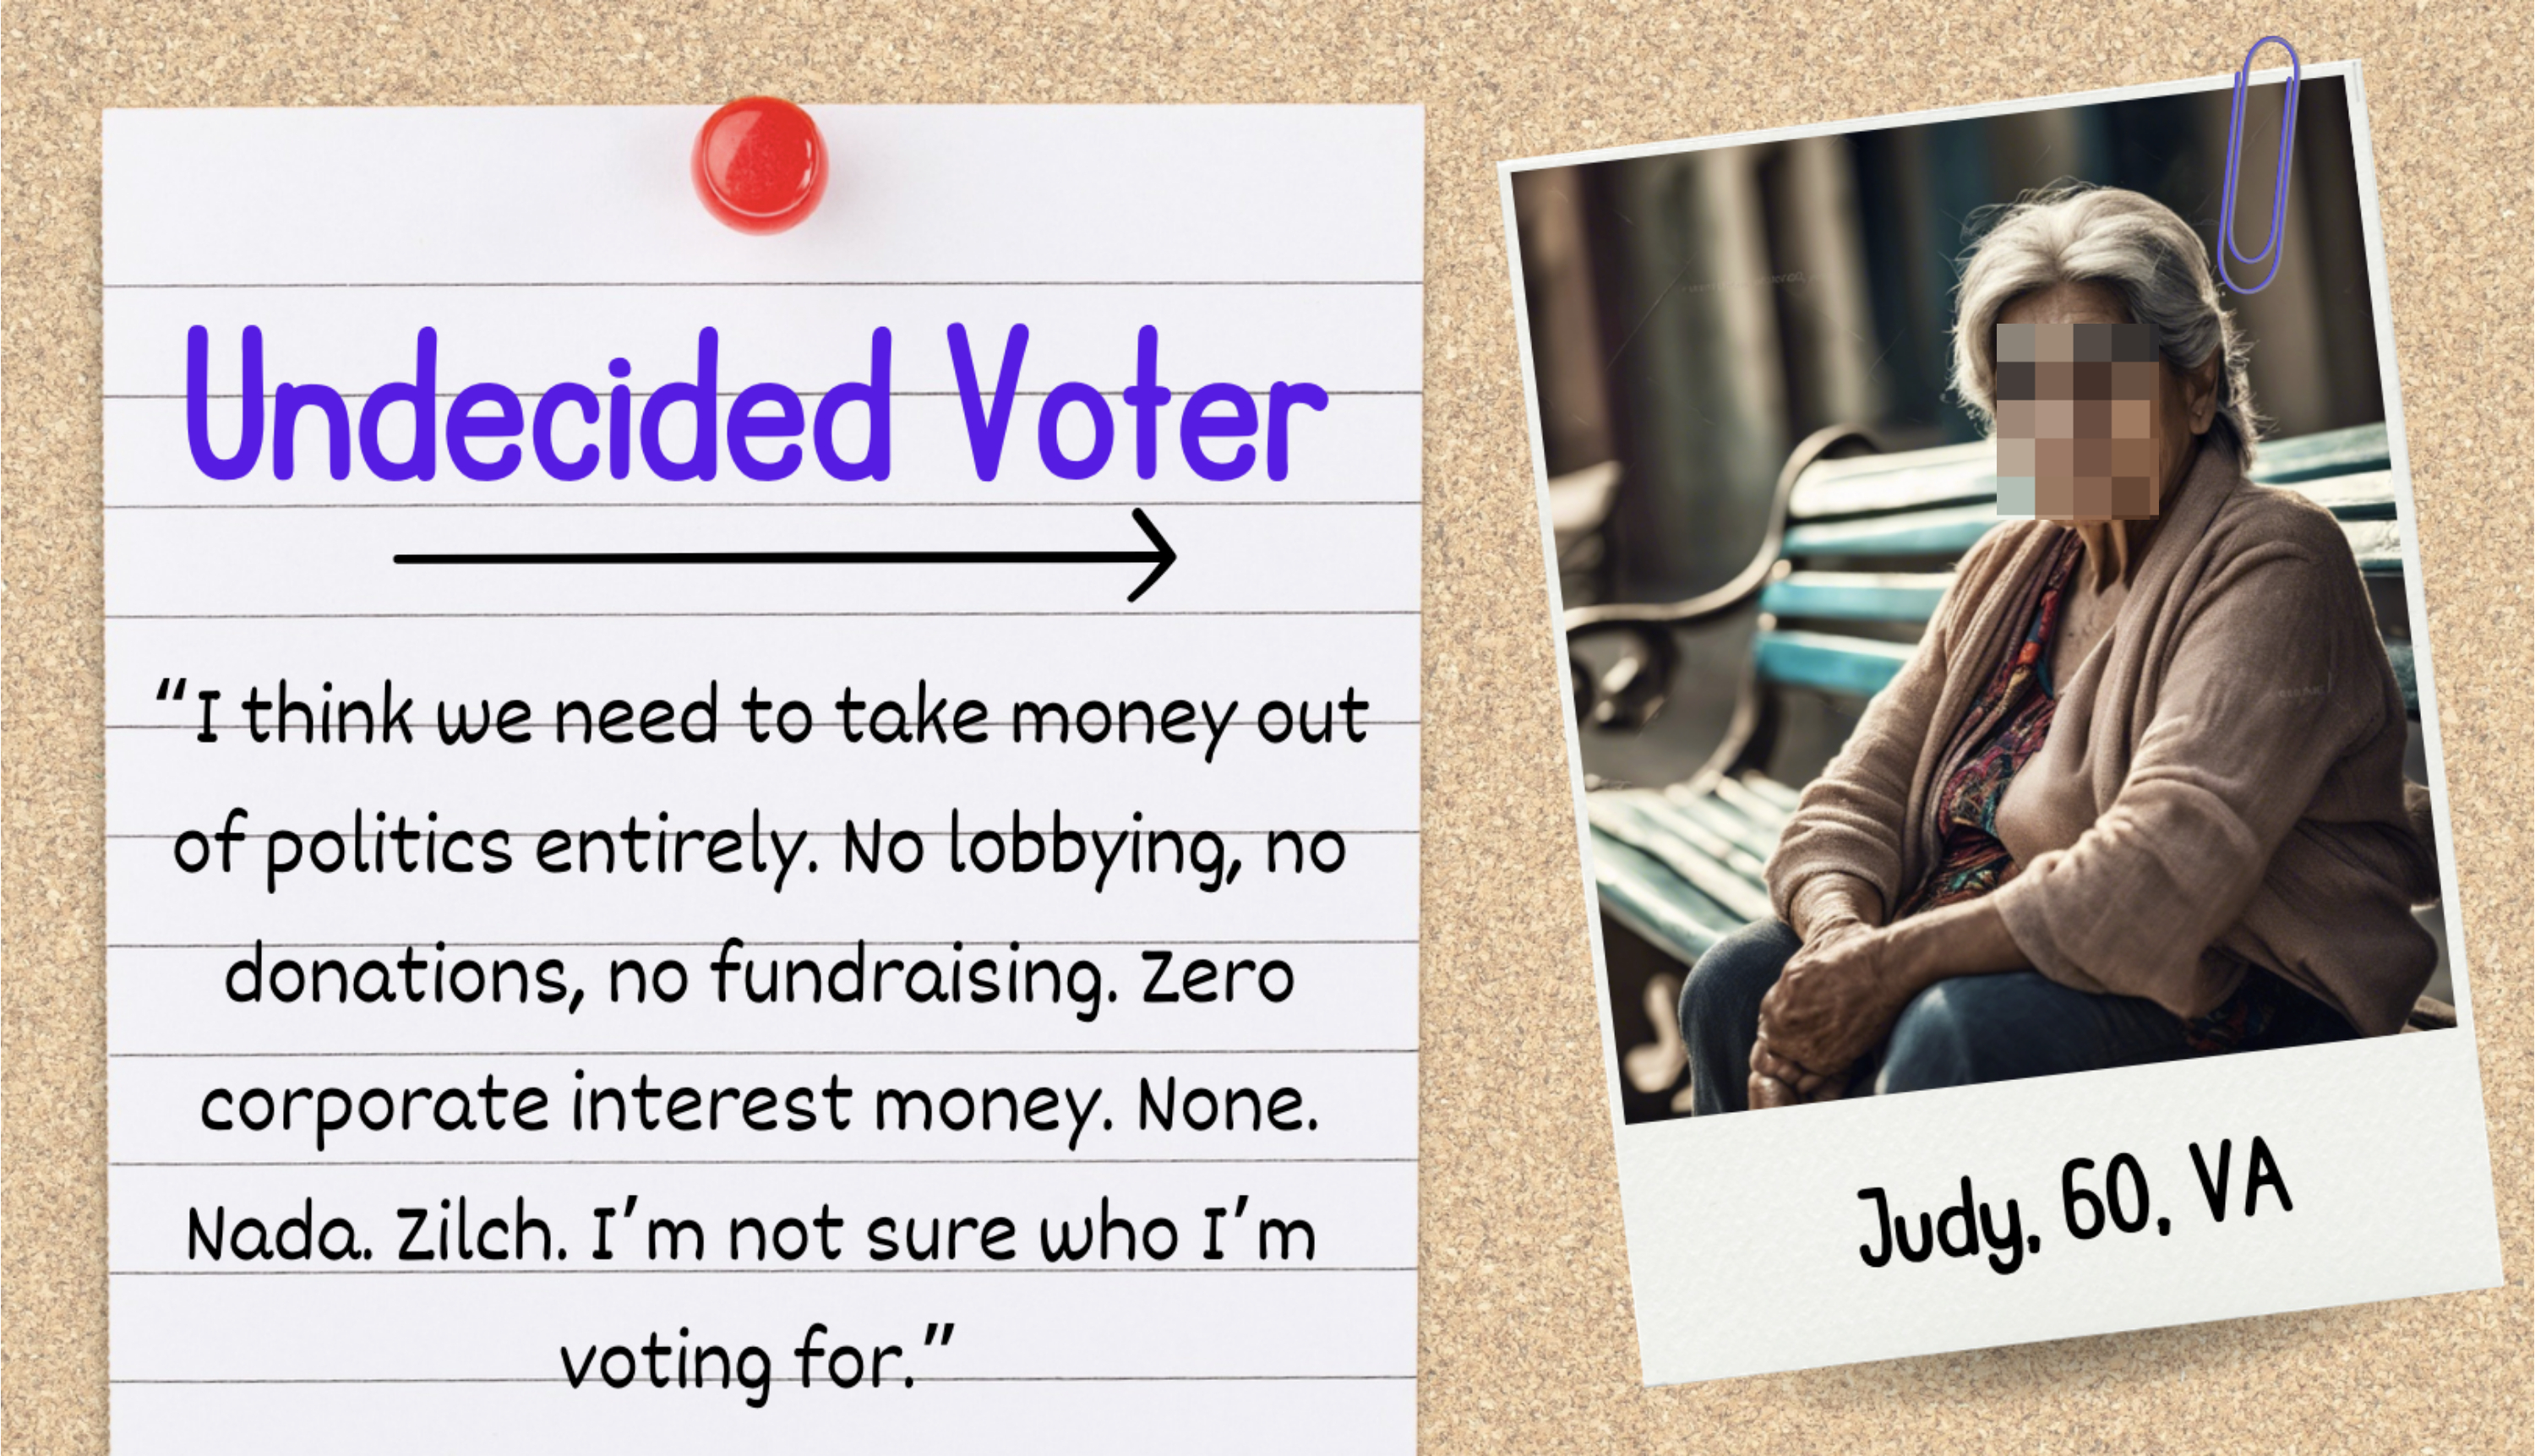 Image on left: Quote about political donations attributed to an &quot;Undecided Voter.&quot; Right: Portrait of Judy, 60, from Virginia